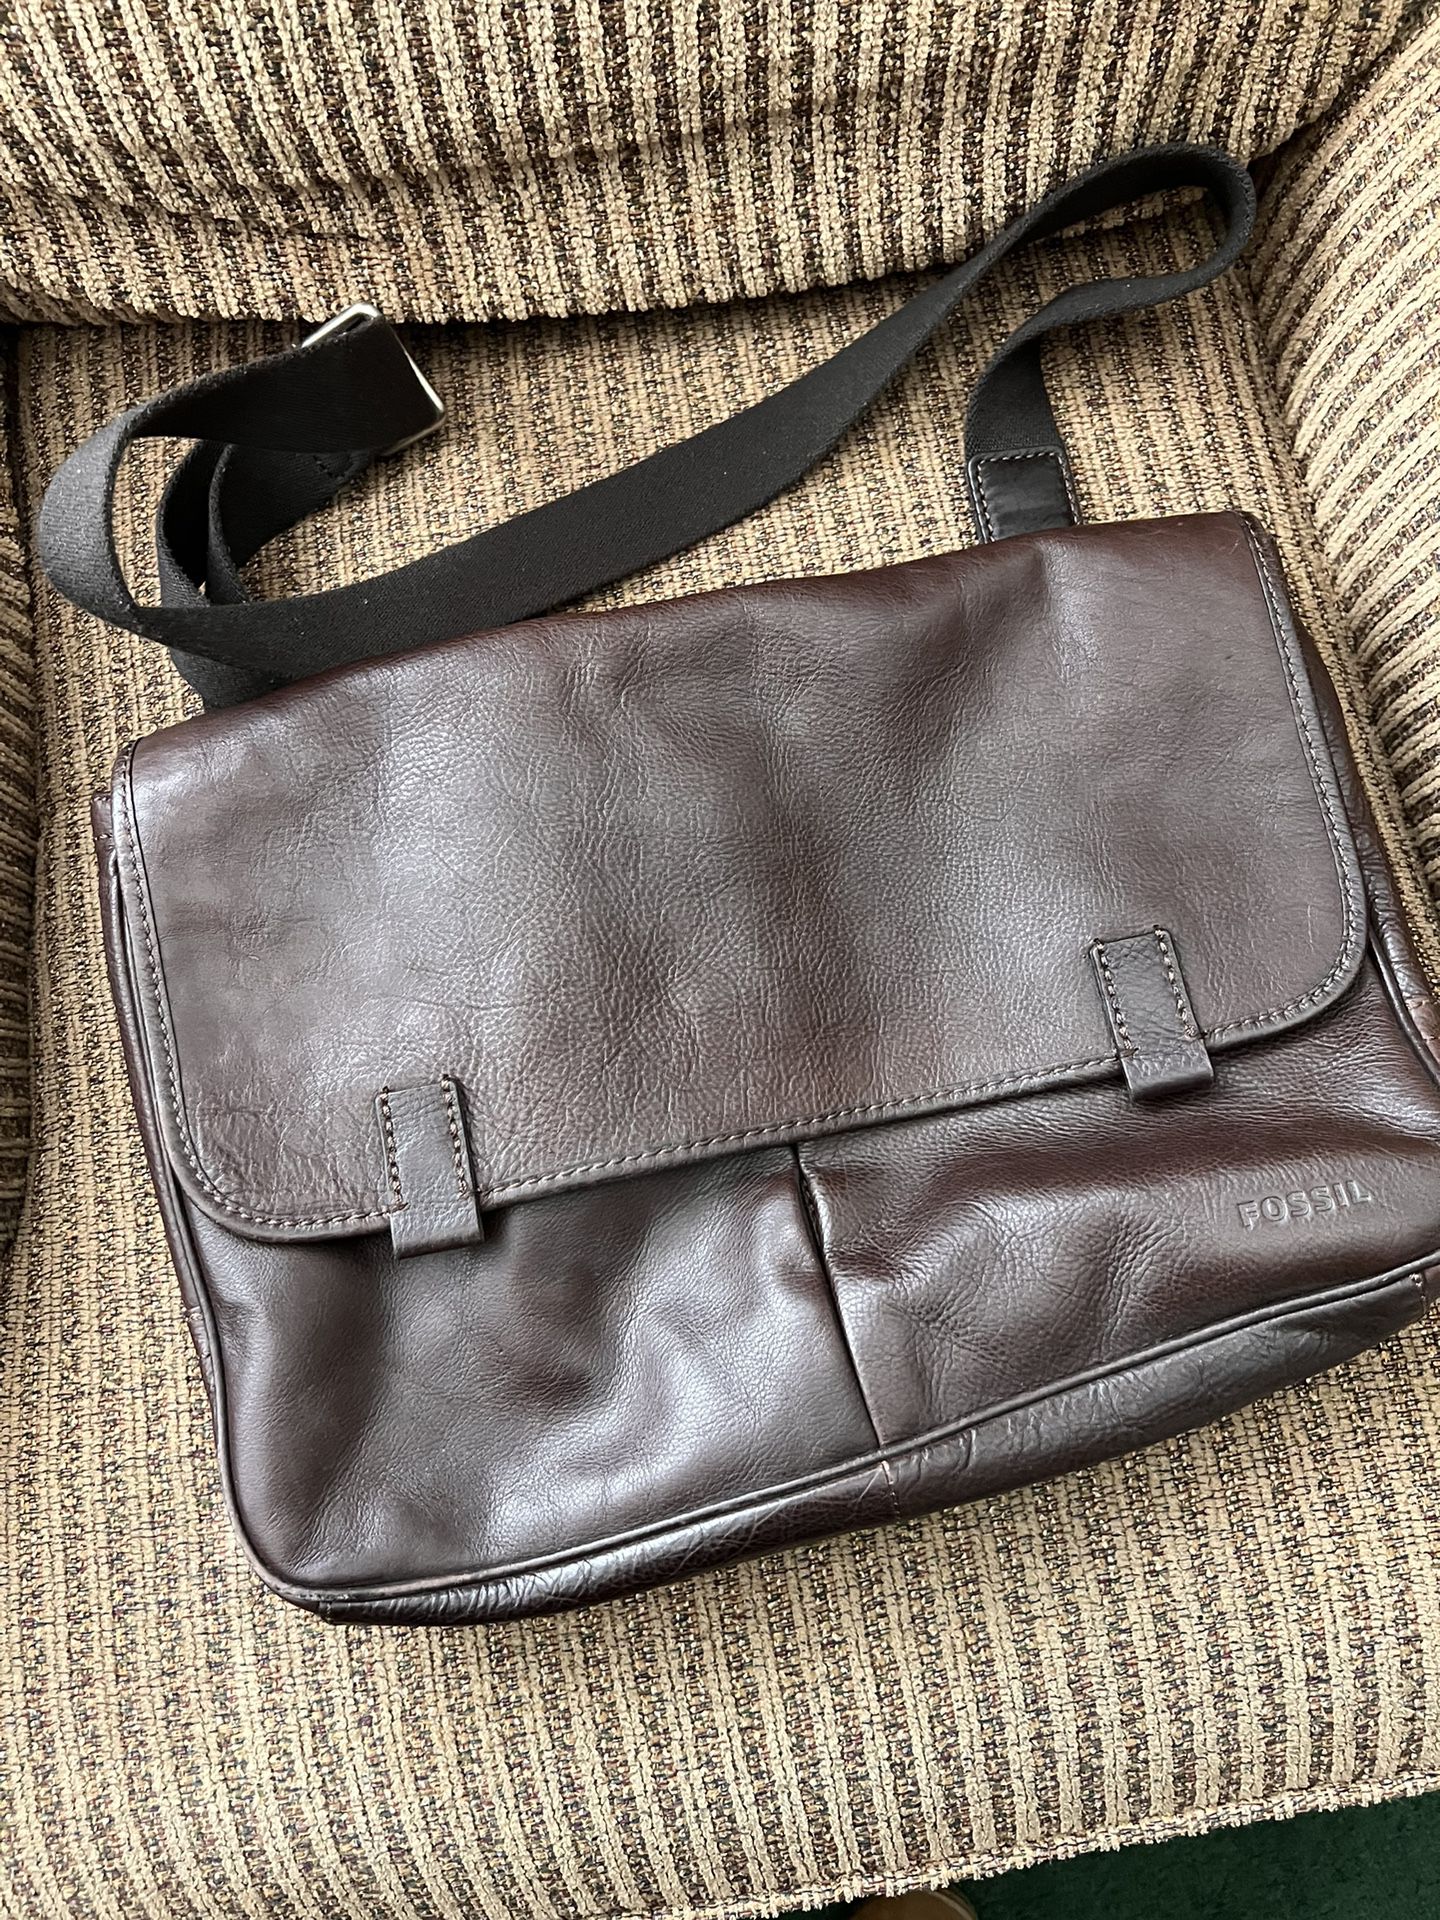 Gorgeous Leather  FOSSIL Messenger bag